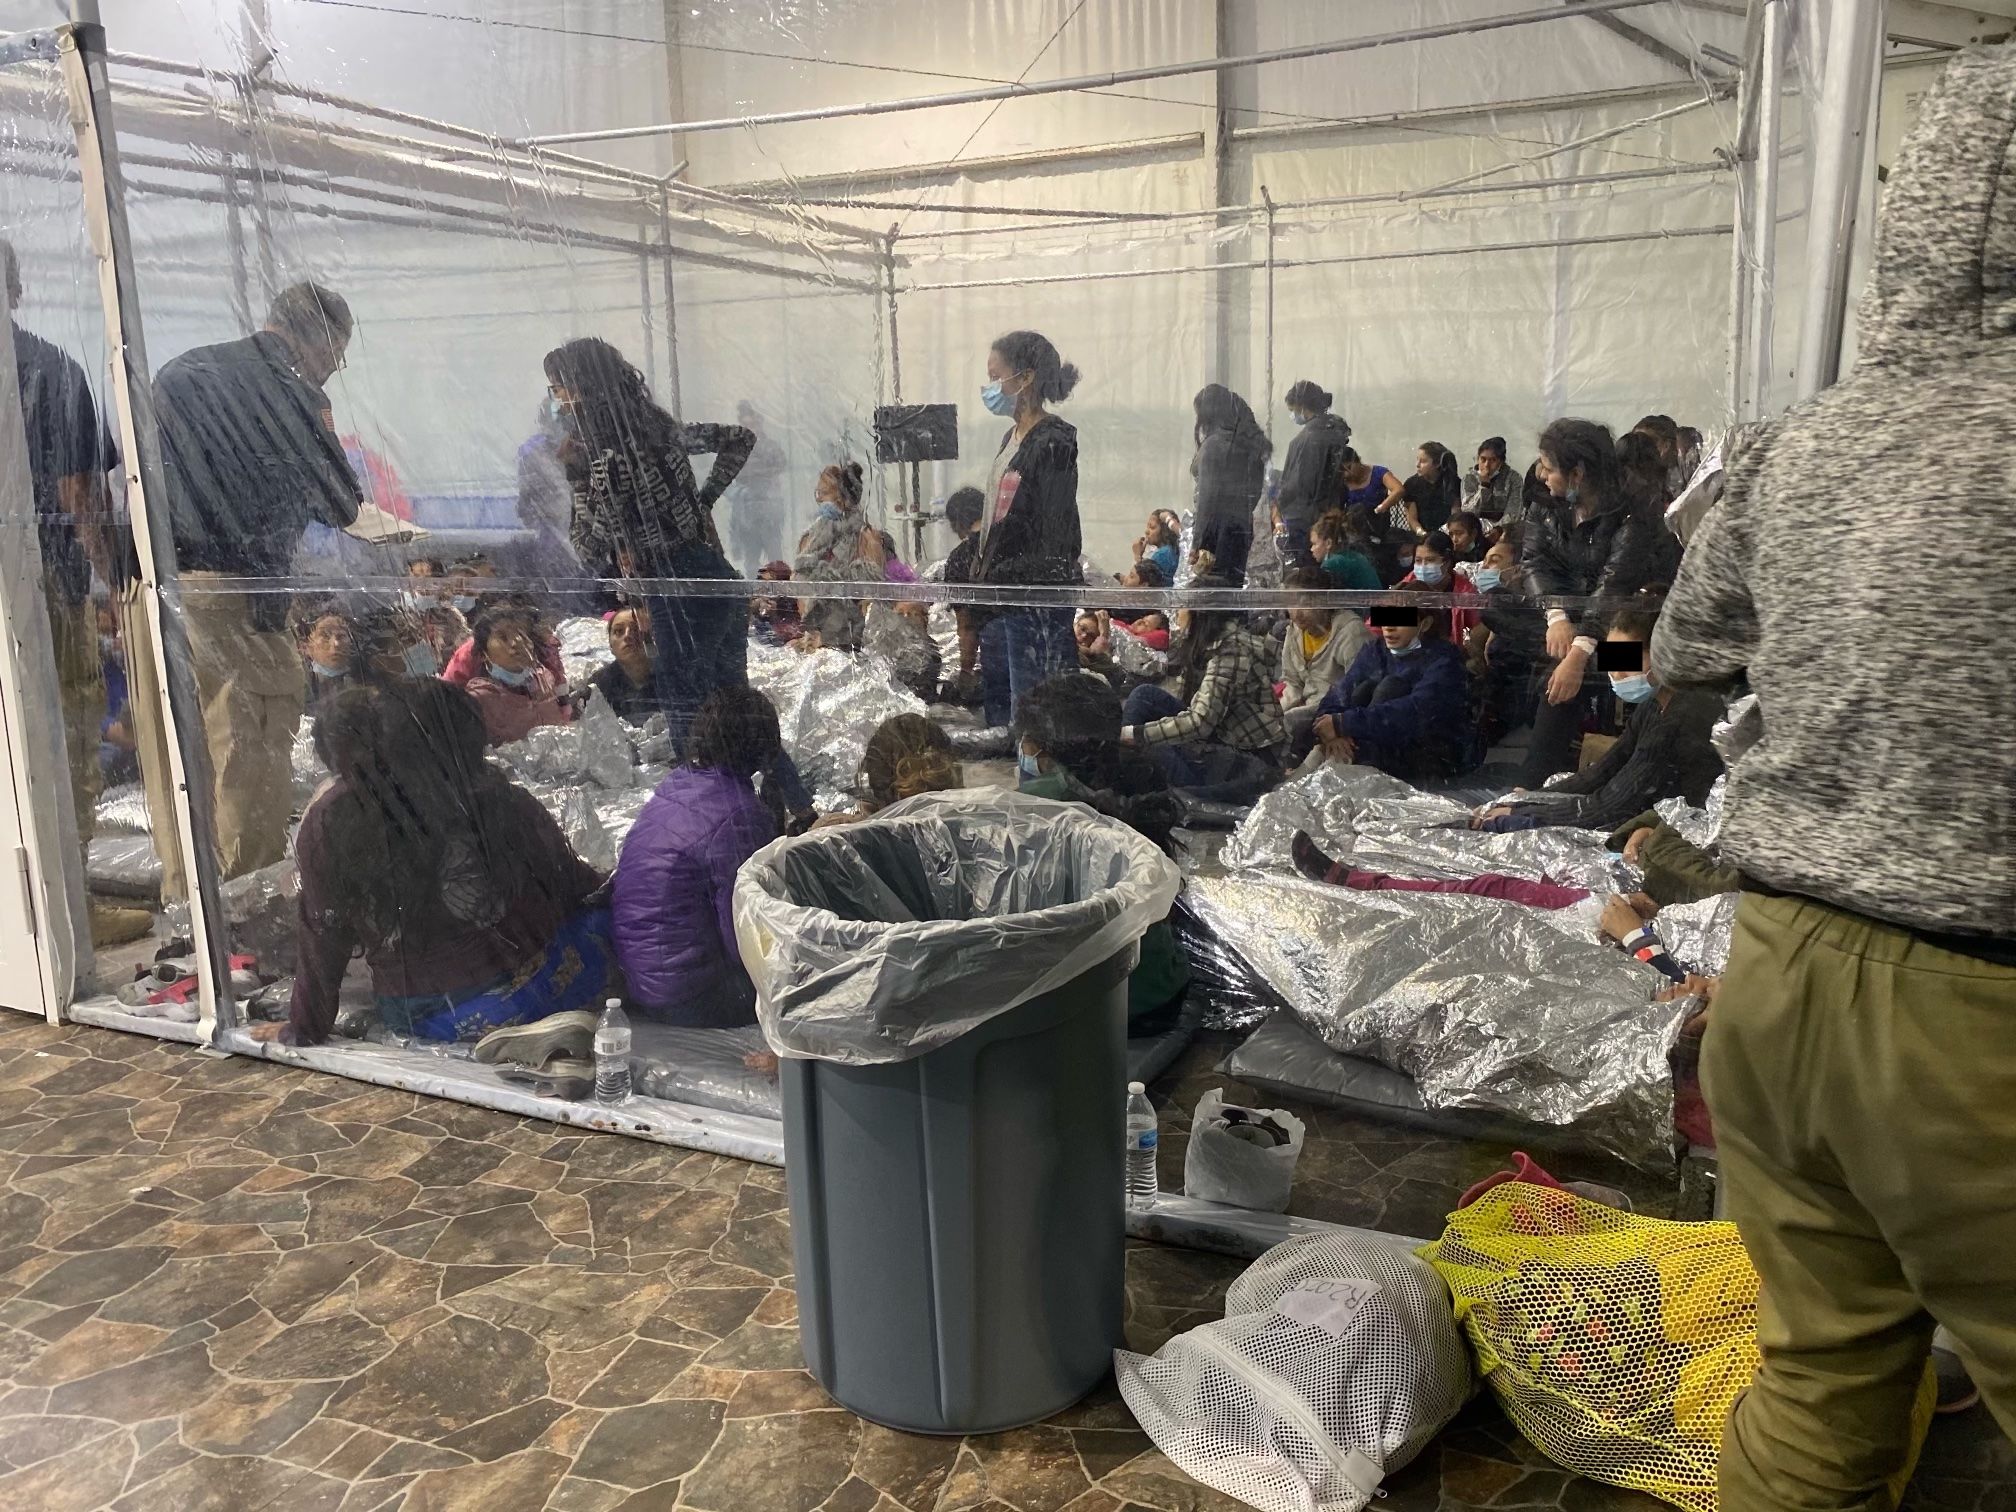 Migrants wait in an overflow border processing facility in March 2021